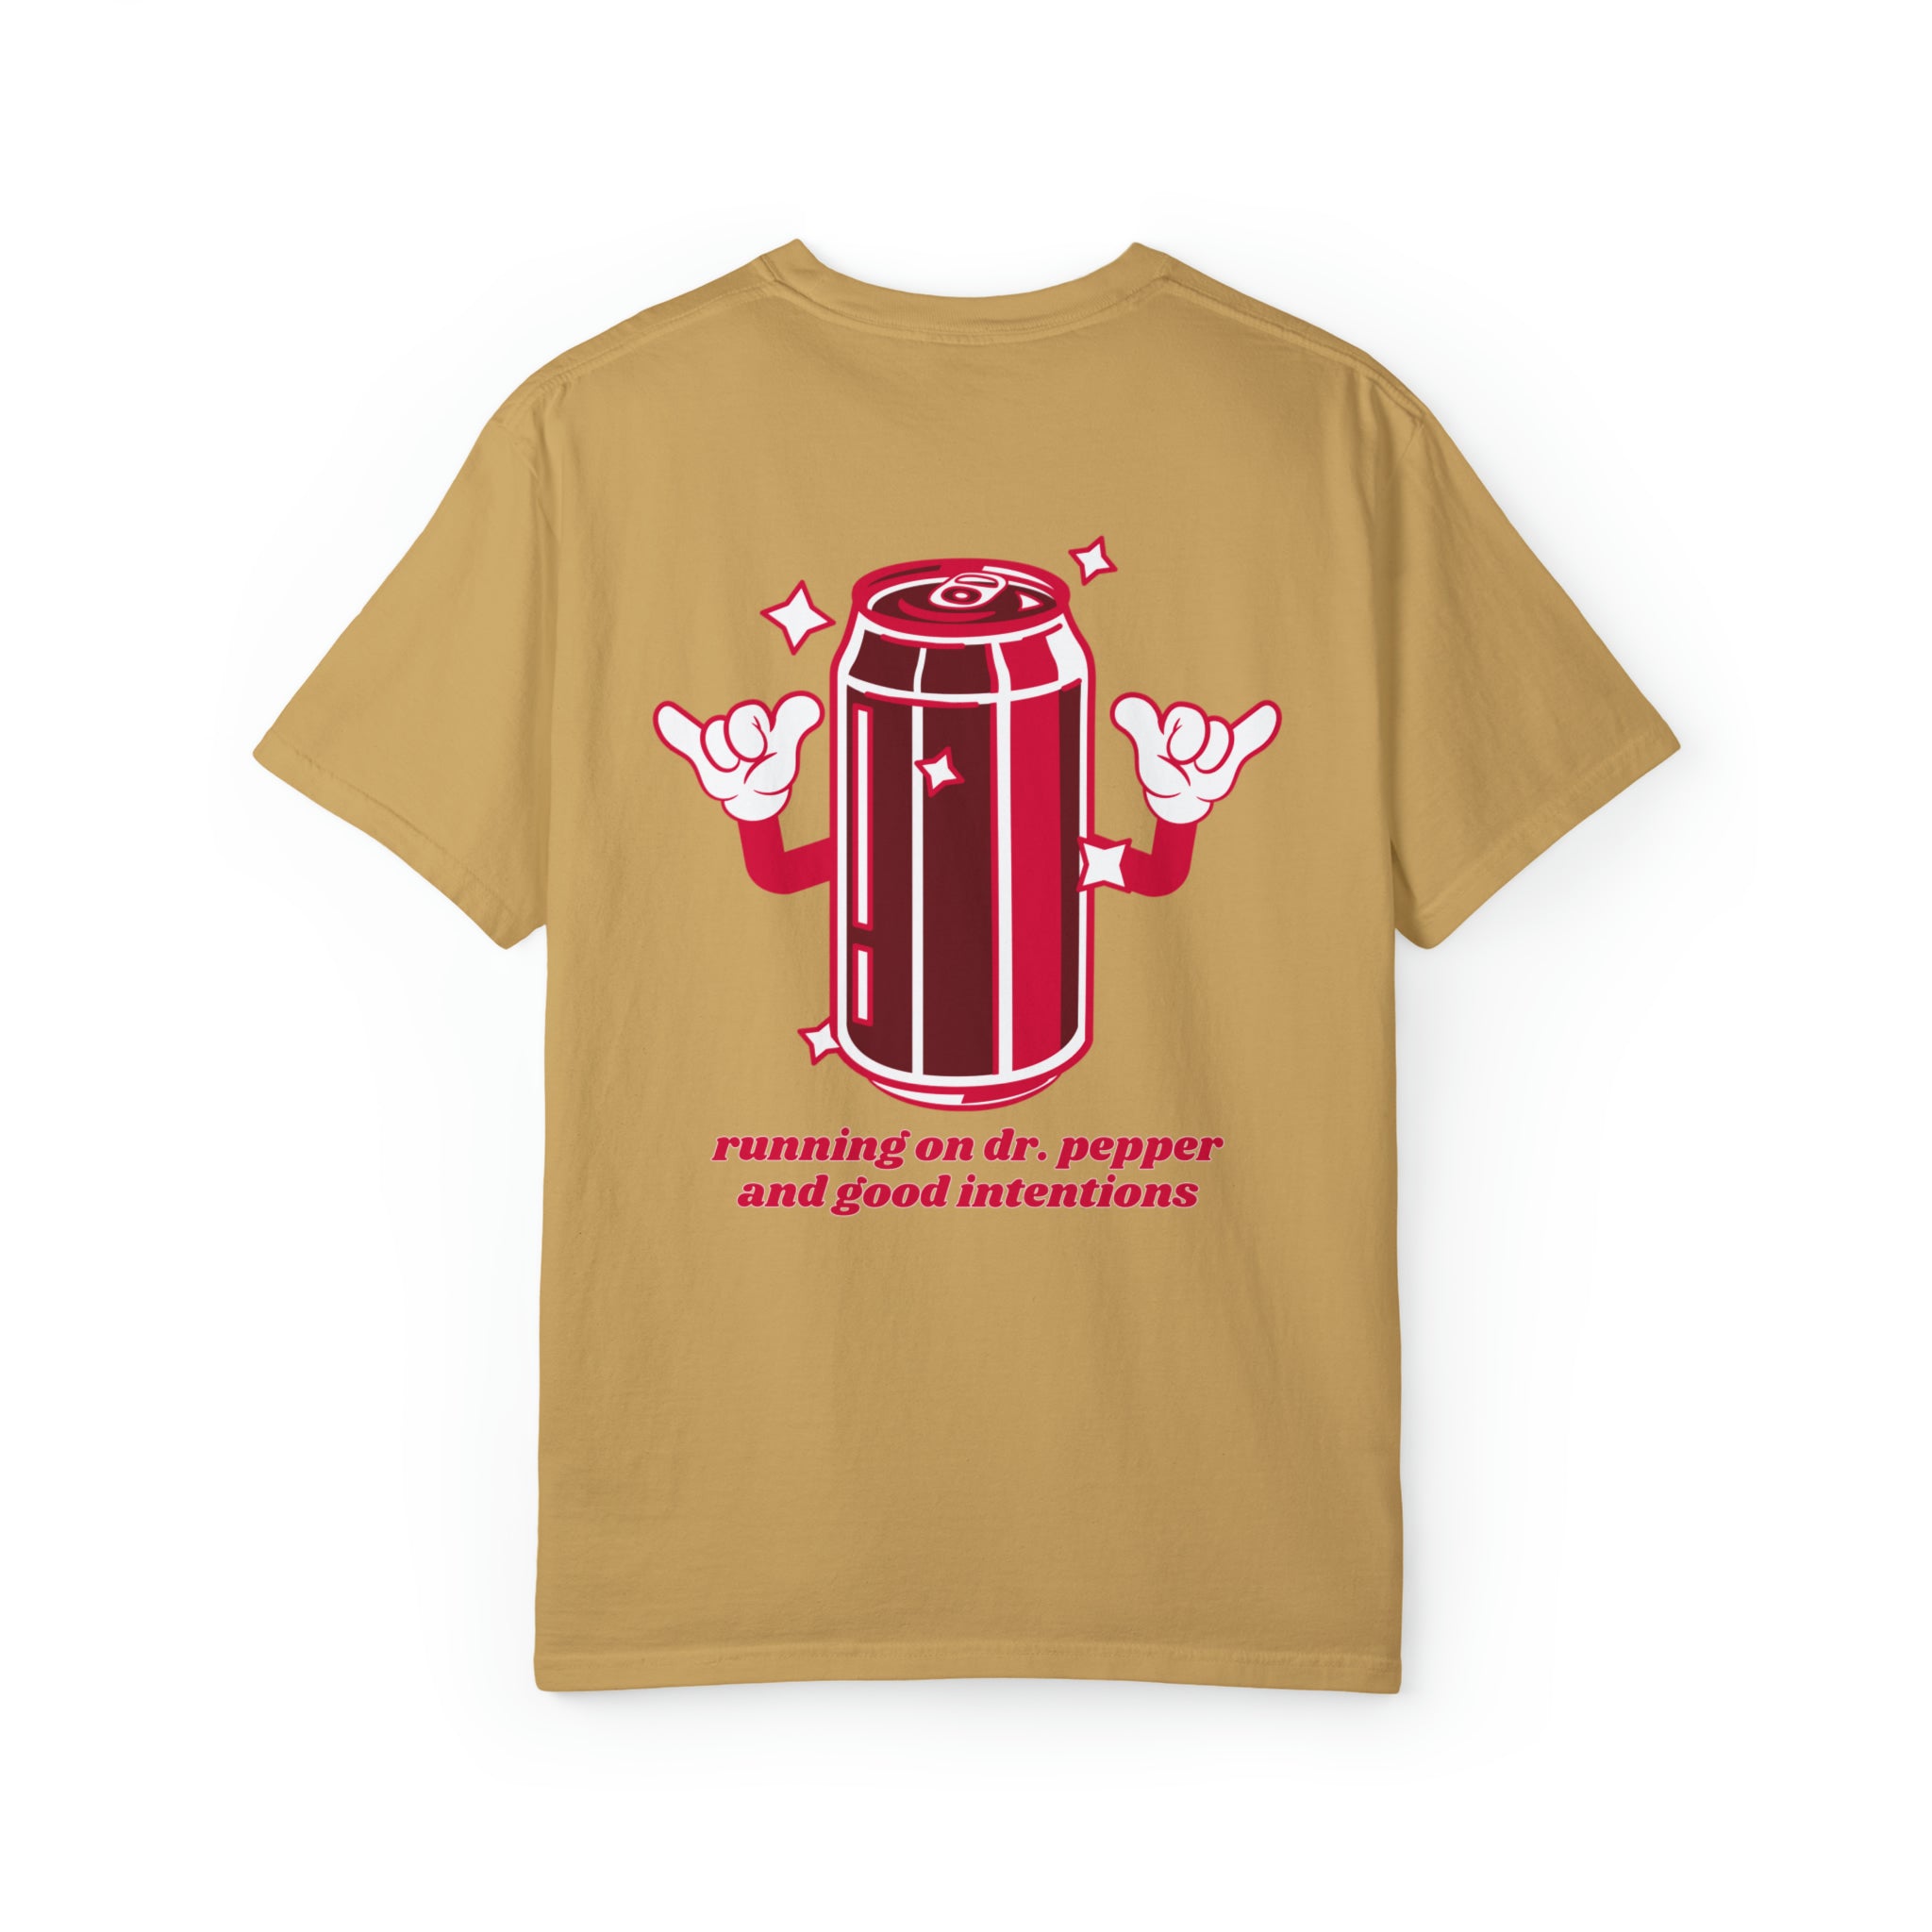 Dr. Pepper and Good Intentions Comfort Colors T shirt